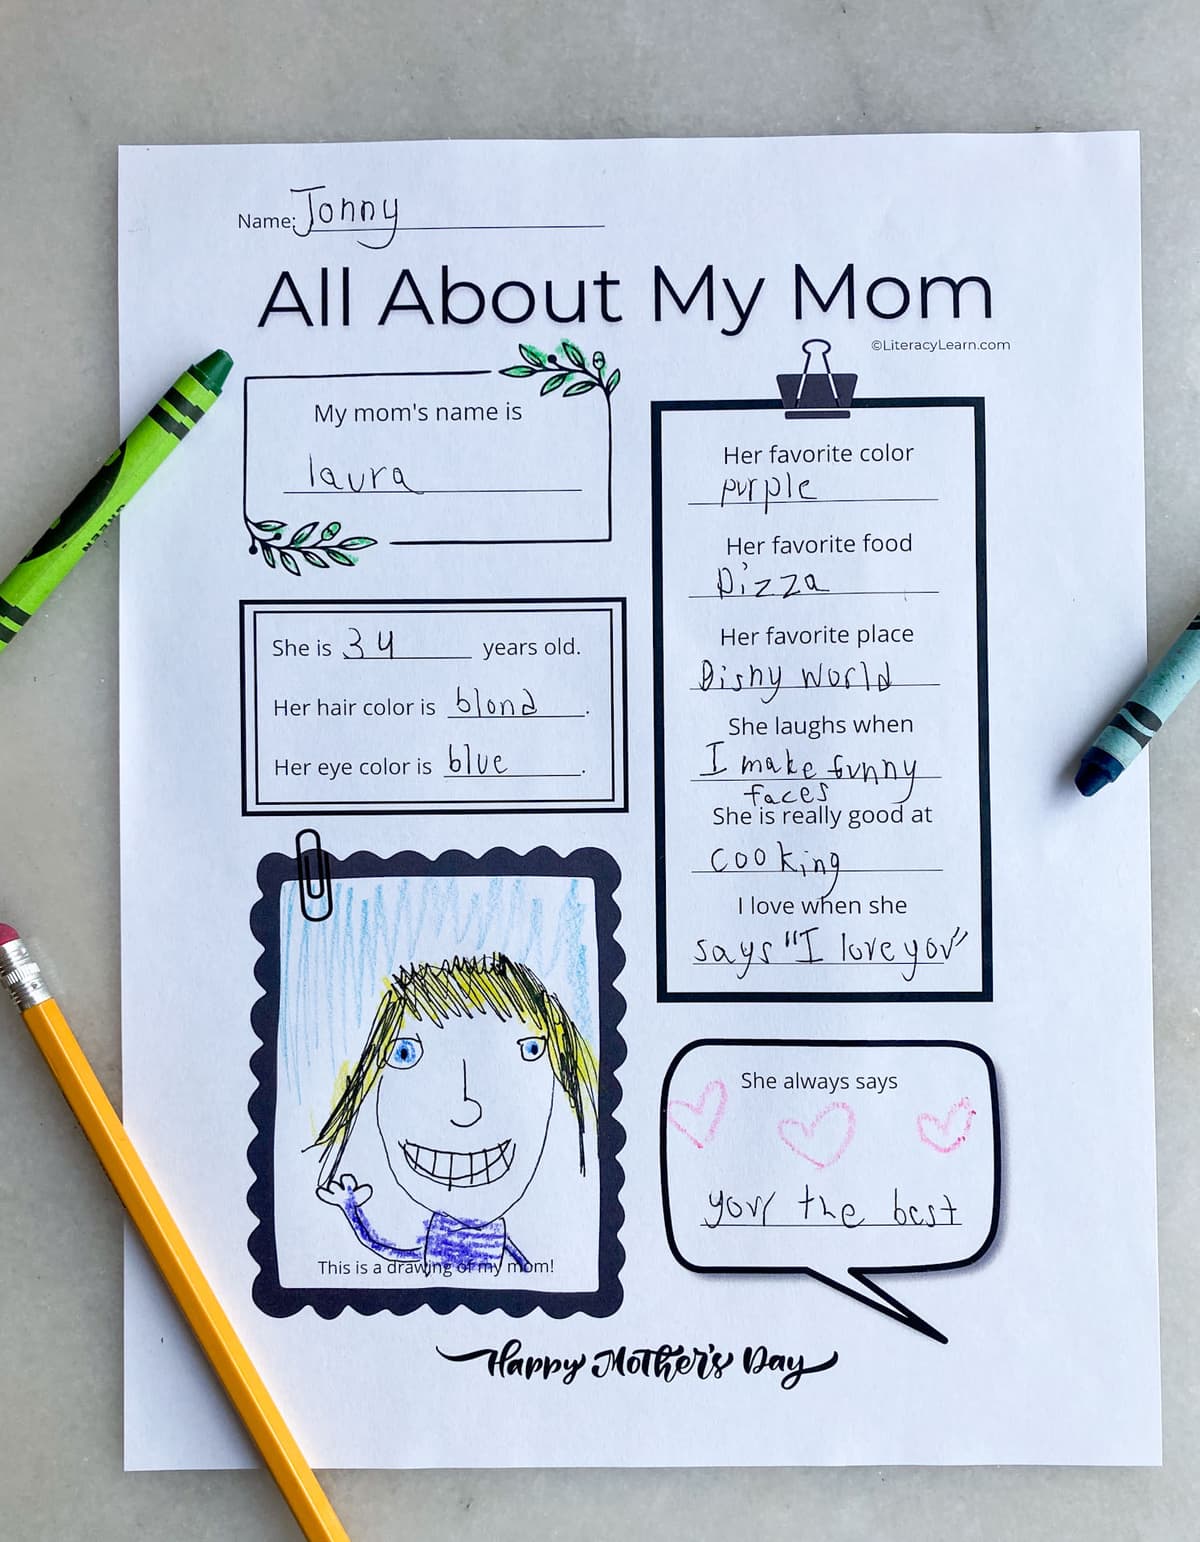 The printed worksheet completed in a child's handwriting.